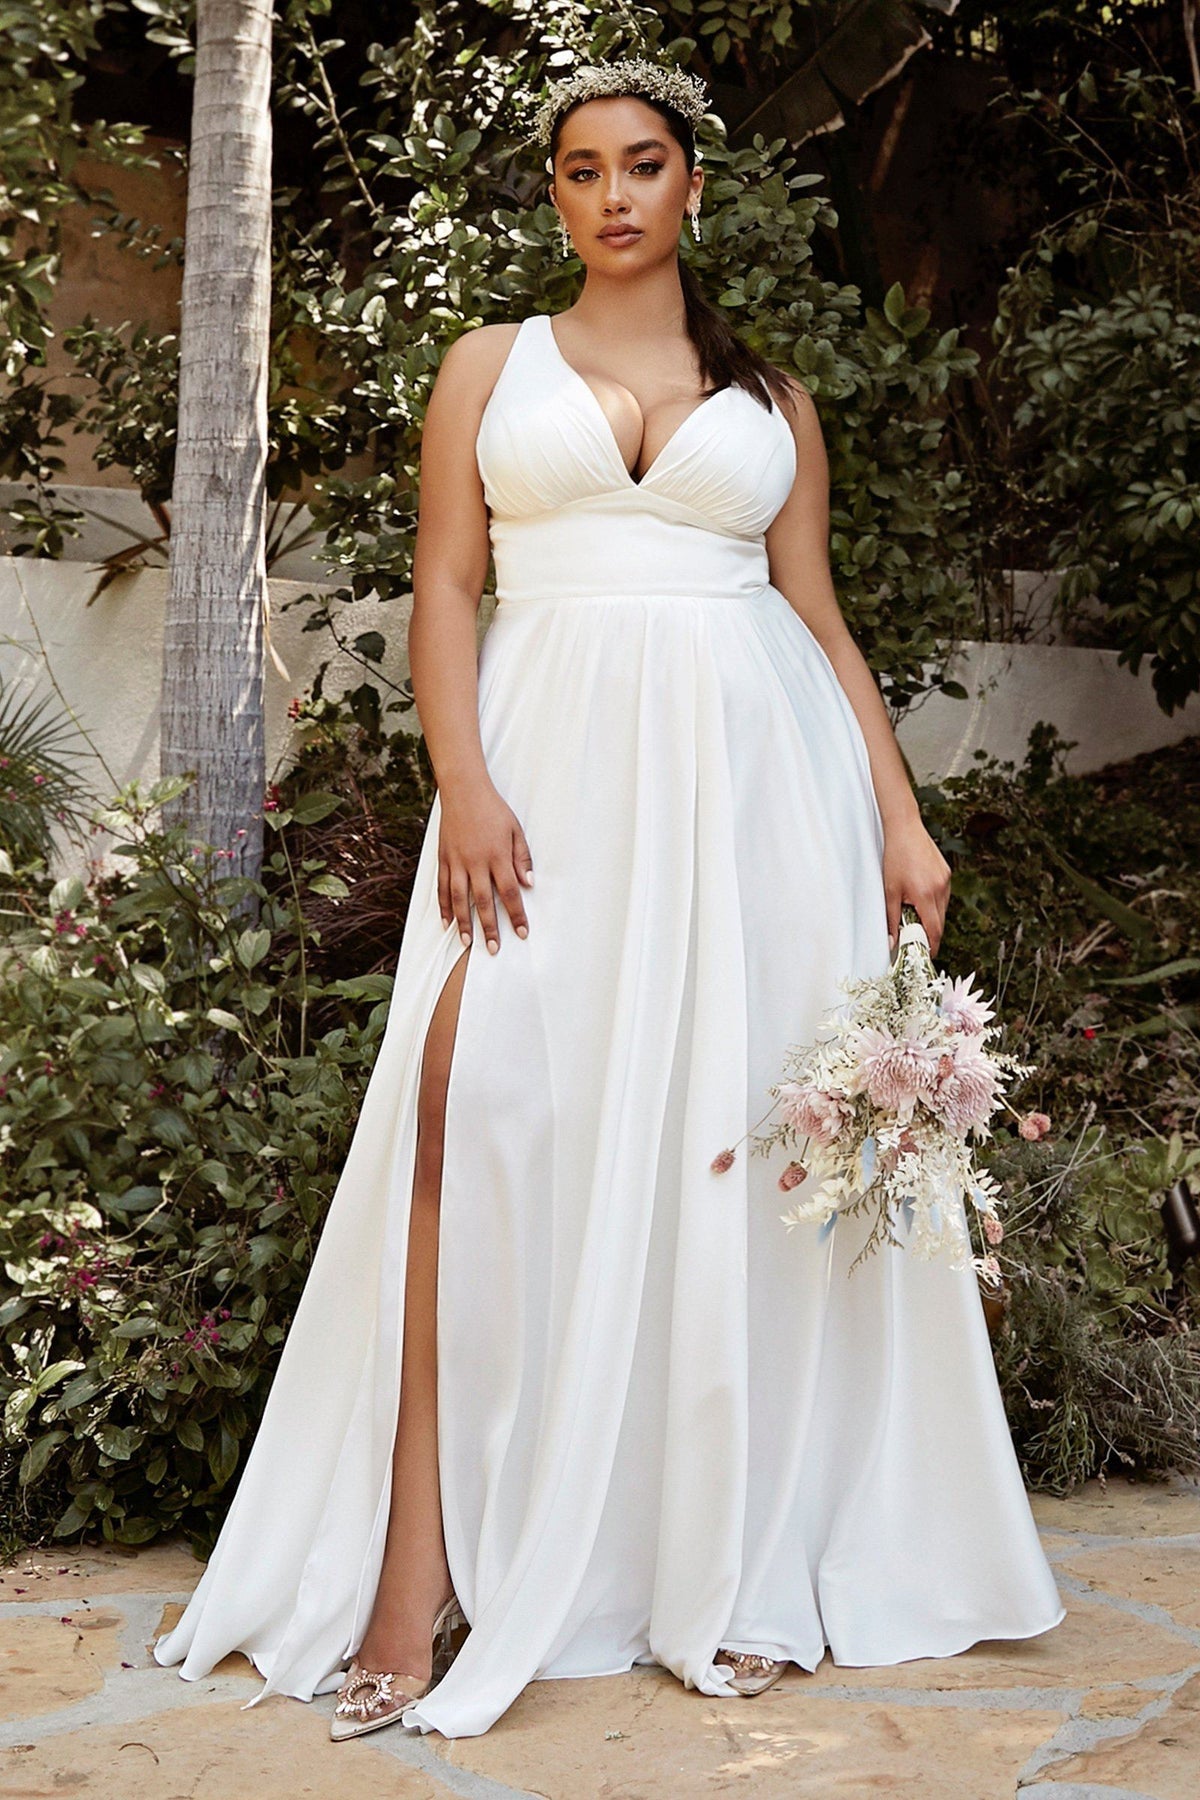 Keep it Chic and Cute! Here are 15 All White Plus Size Party Dresses | The  Curvy Fashionista | White plus size dresses, All white party dresses, White  dress party